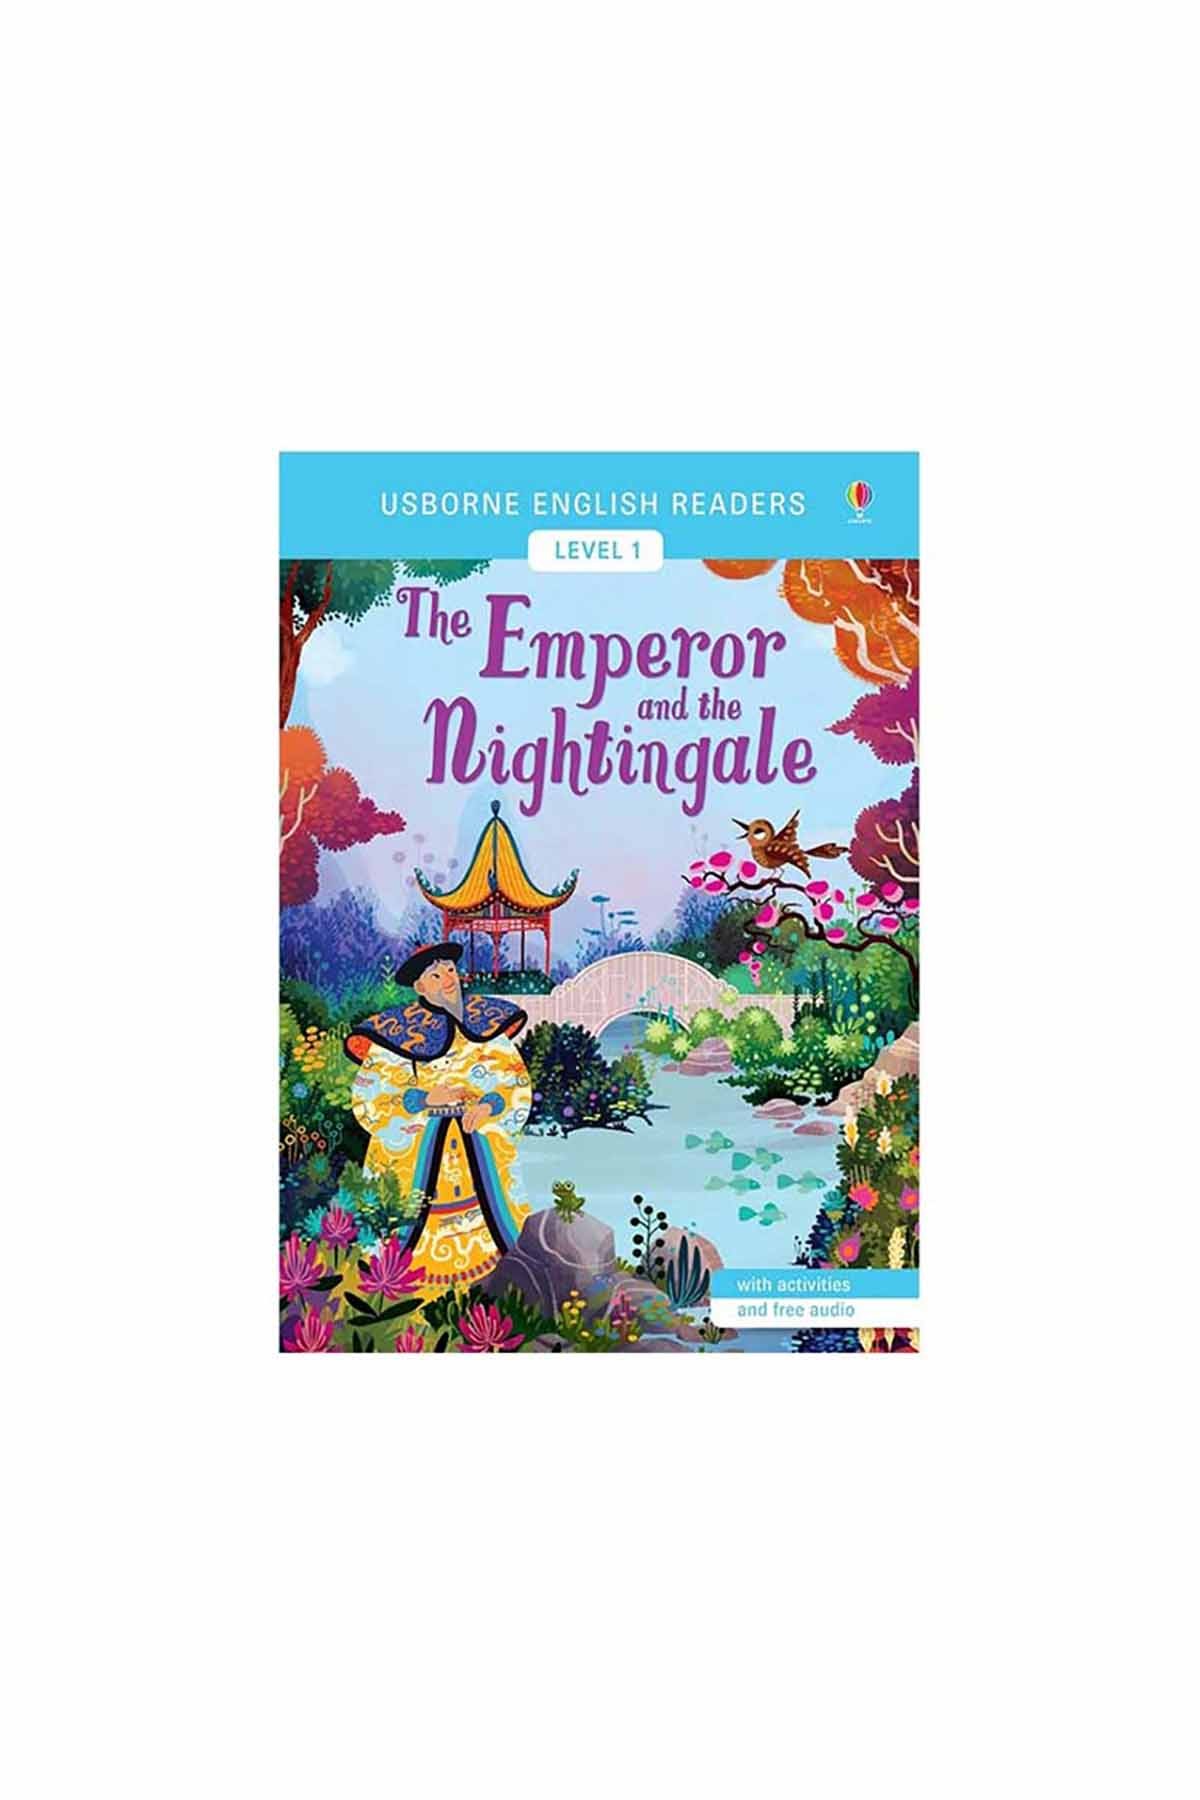 The Usborne The Emperor and the Nightingale